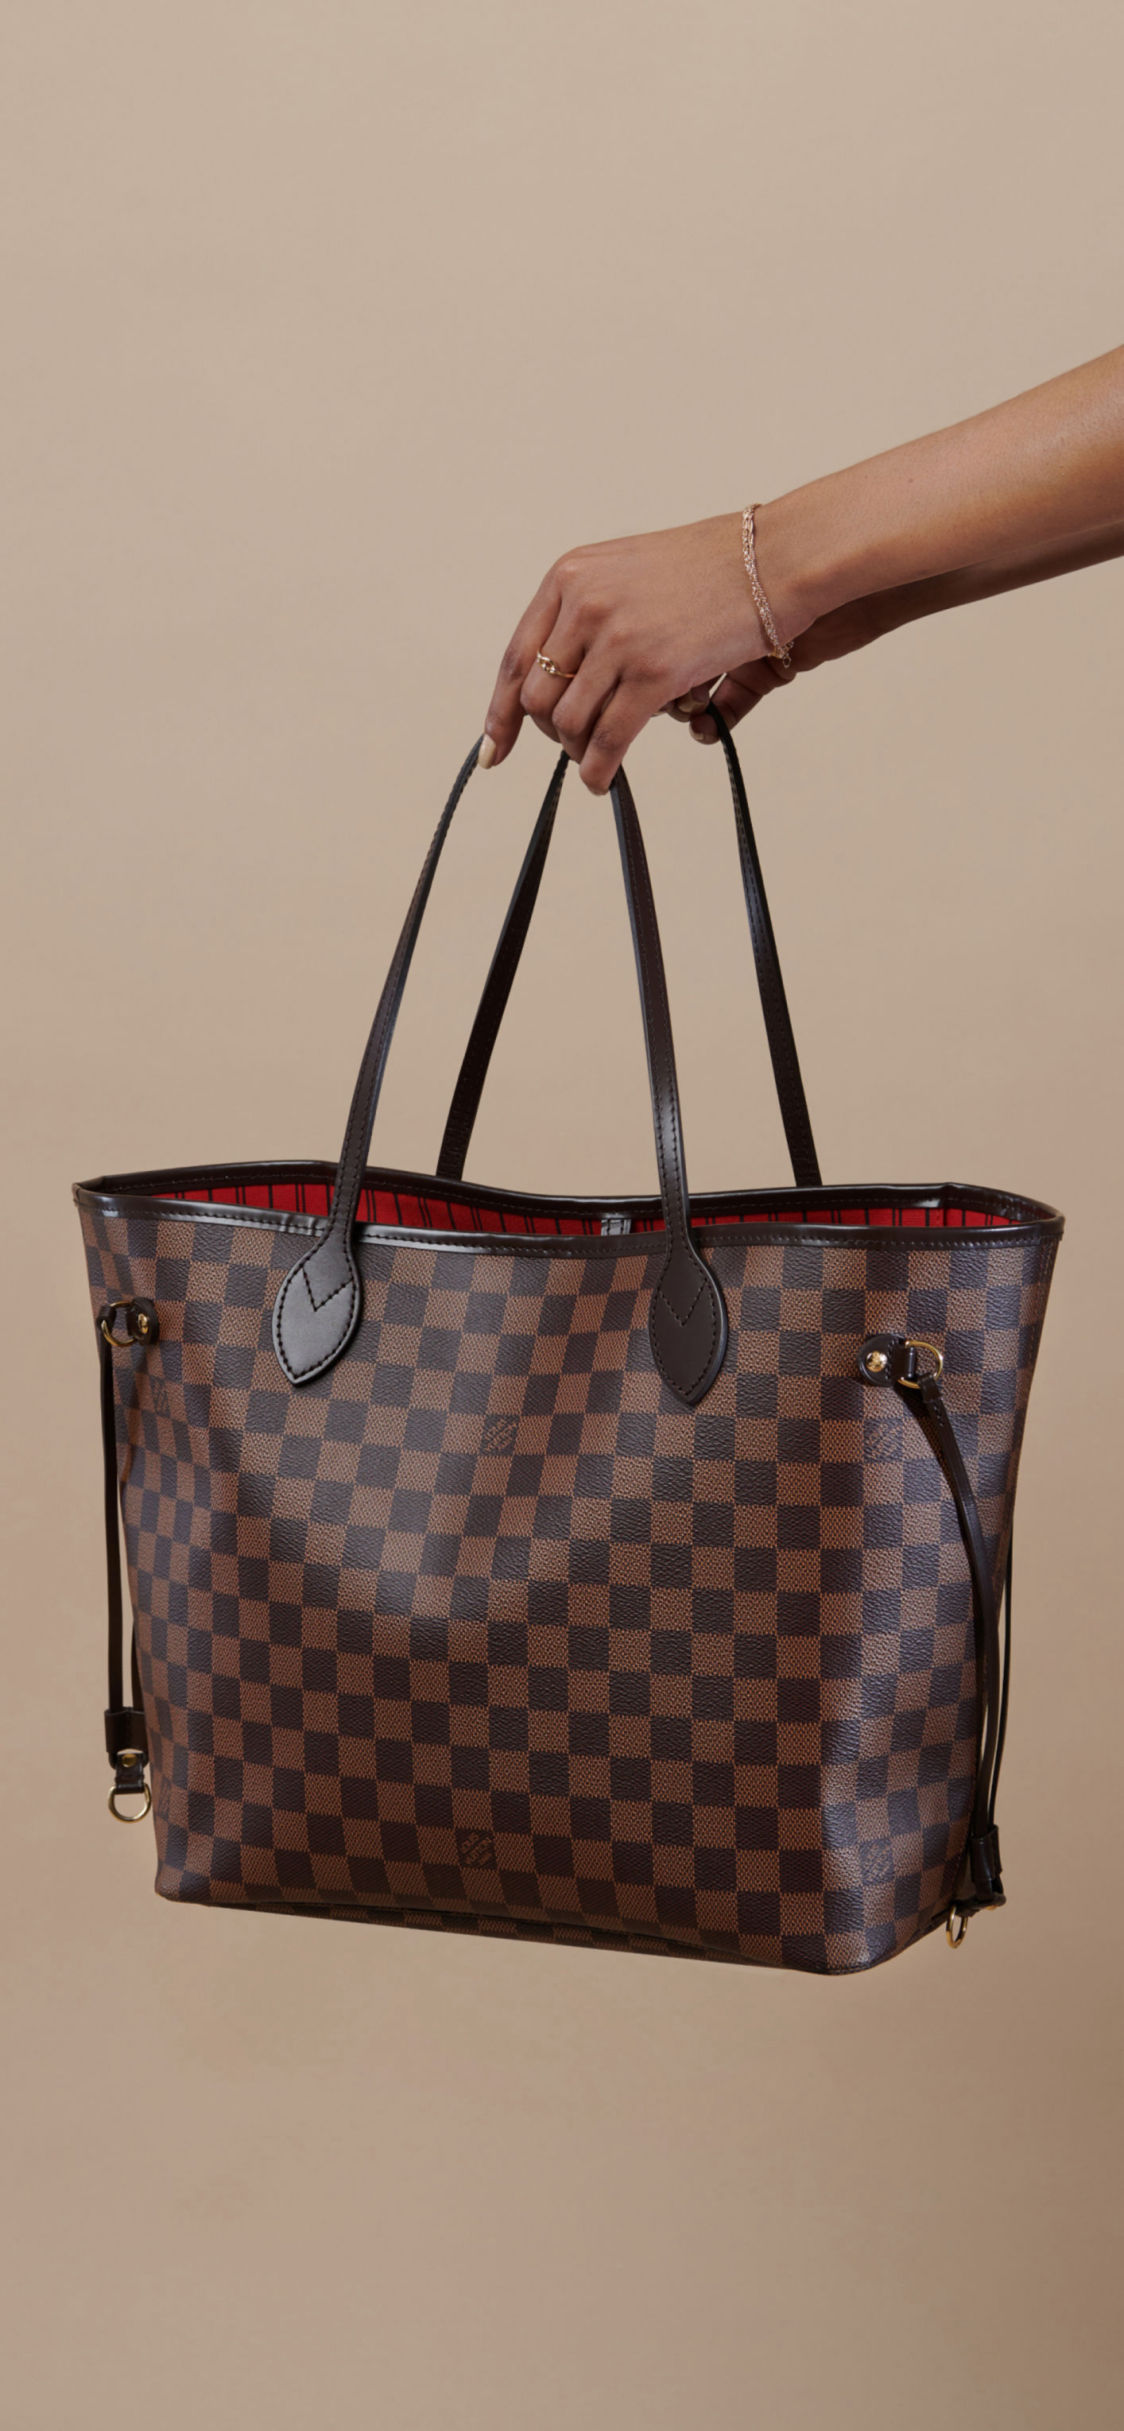 How to Care for Your Louis Vuitton Neverfull: Rebag's Basics